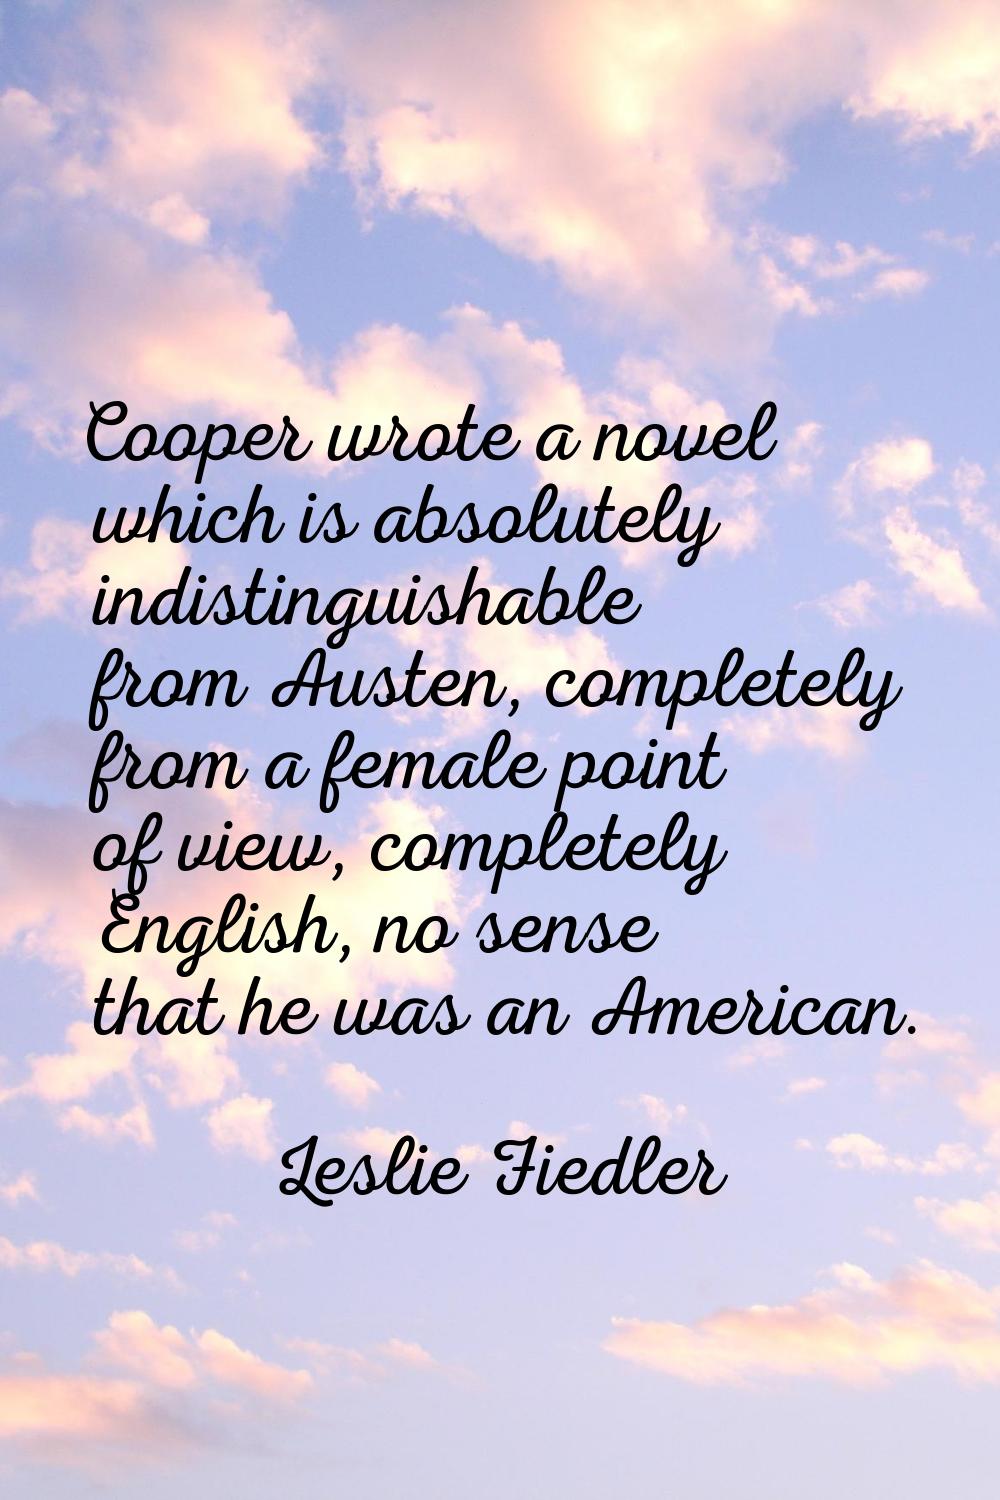 Cooper wrote a novel which is absolutely indistinguishable from Austen, completely from a female po